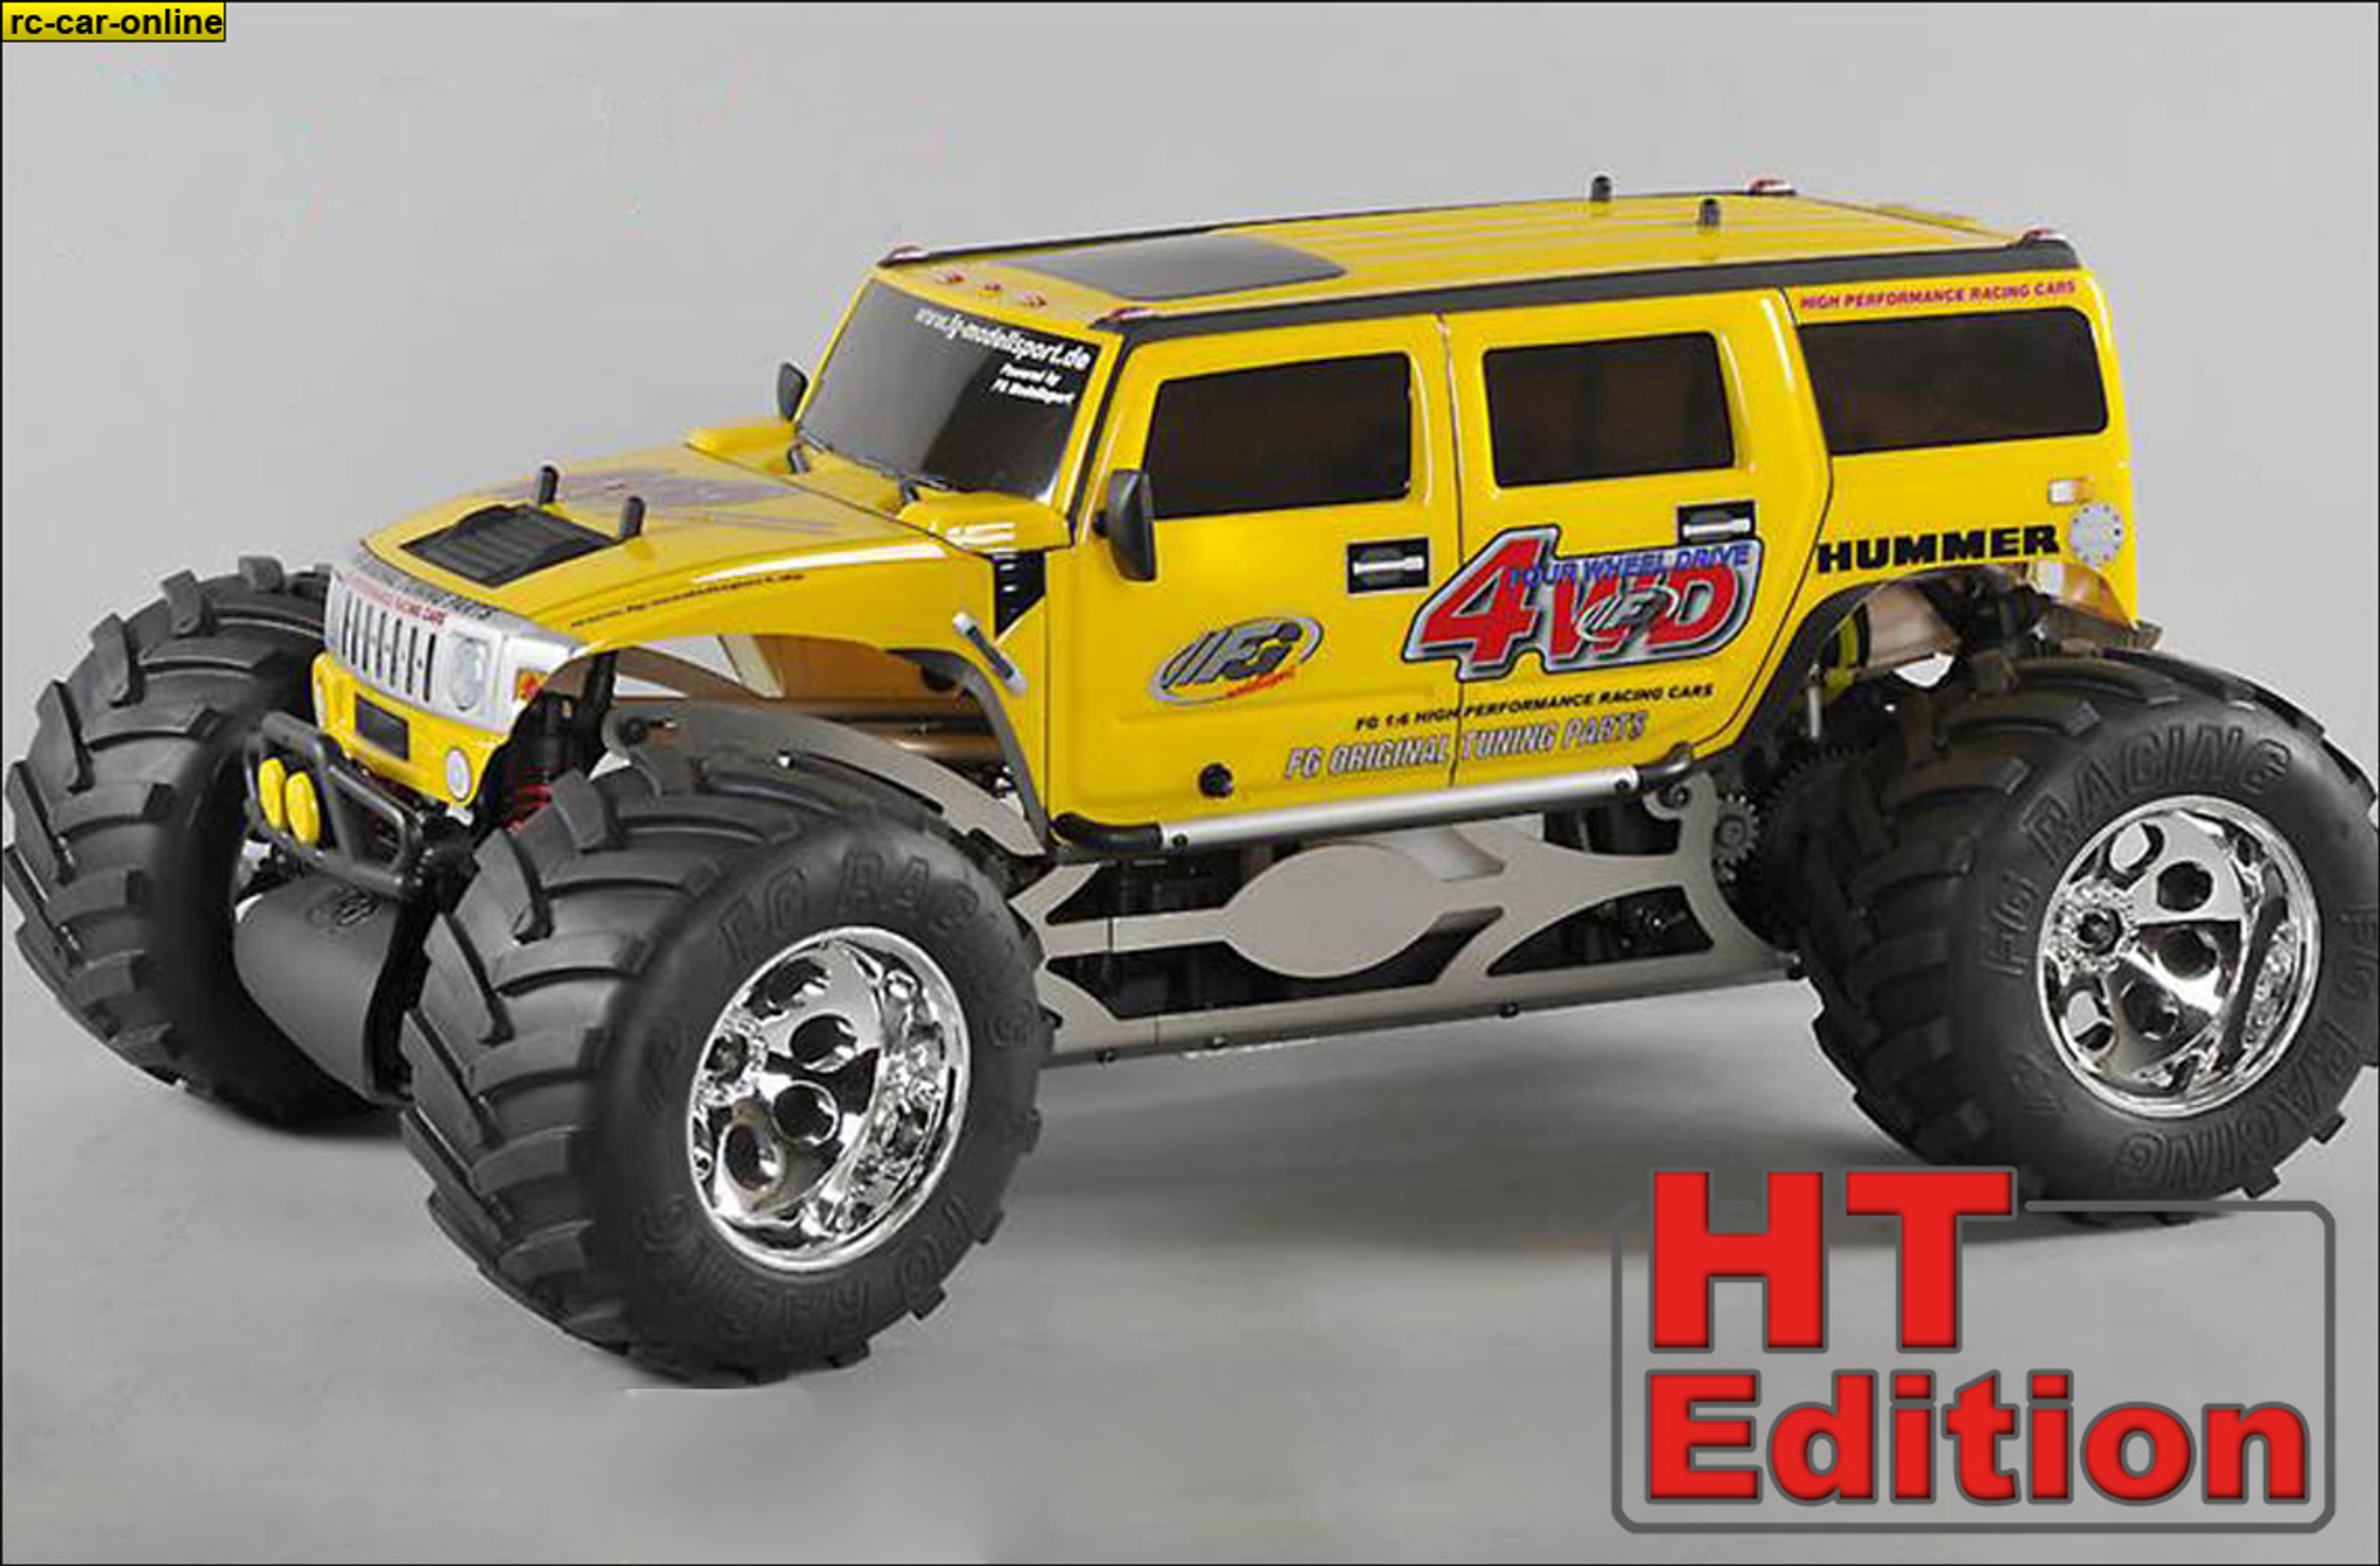 FG Monster Hummer WB535 4WD HT-Edition